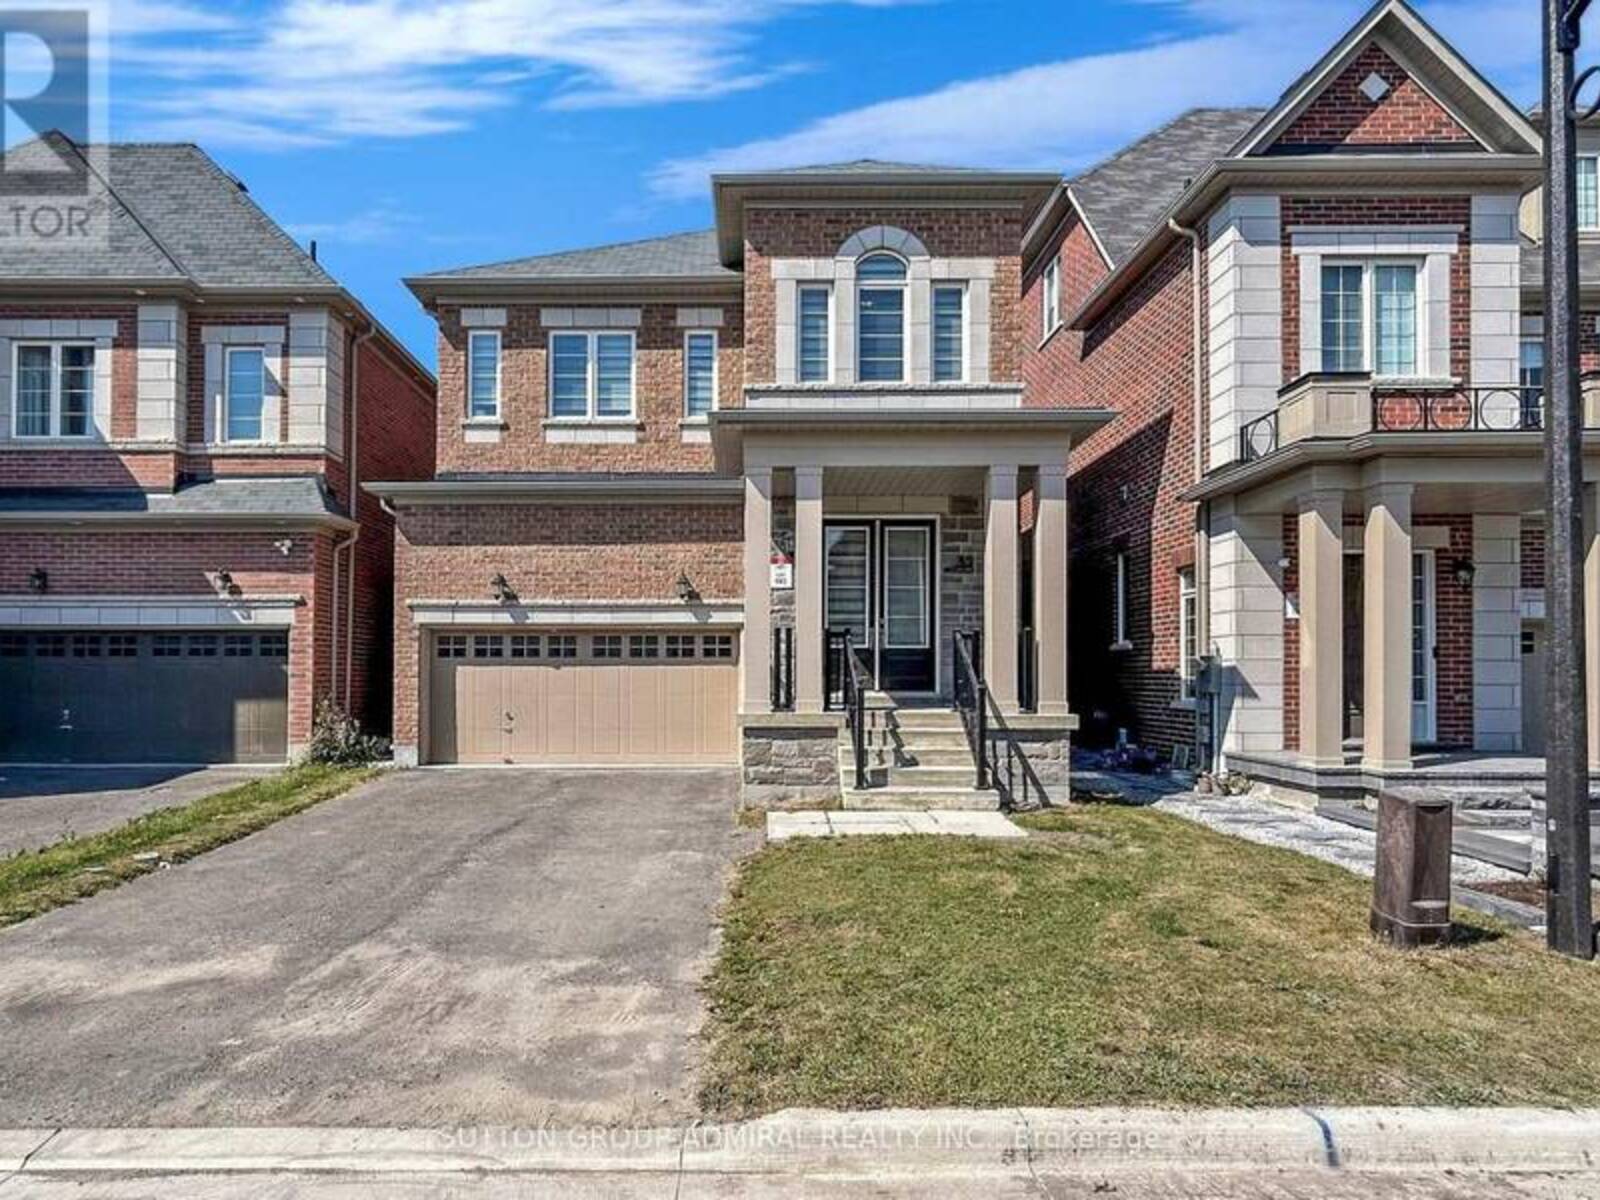 32 RED GIANT ST, Richmond Hill, Ontario L4C 4Y4